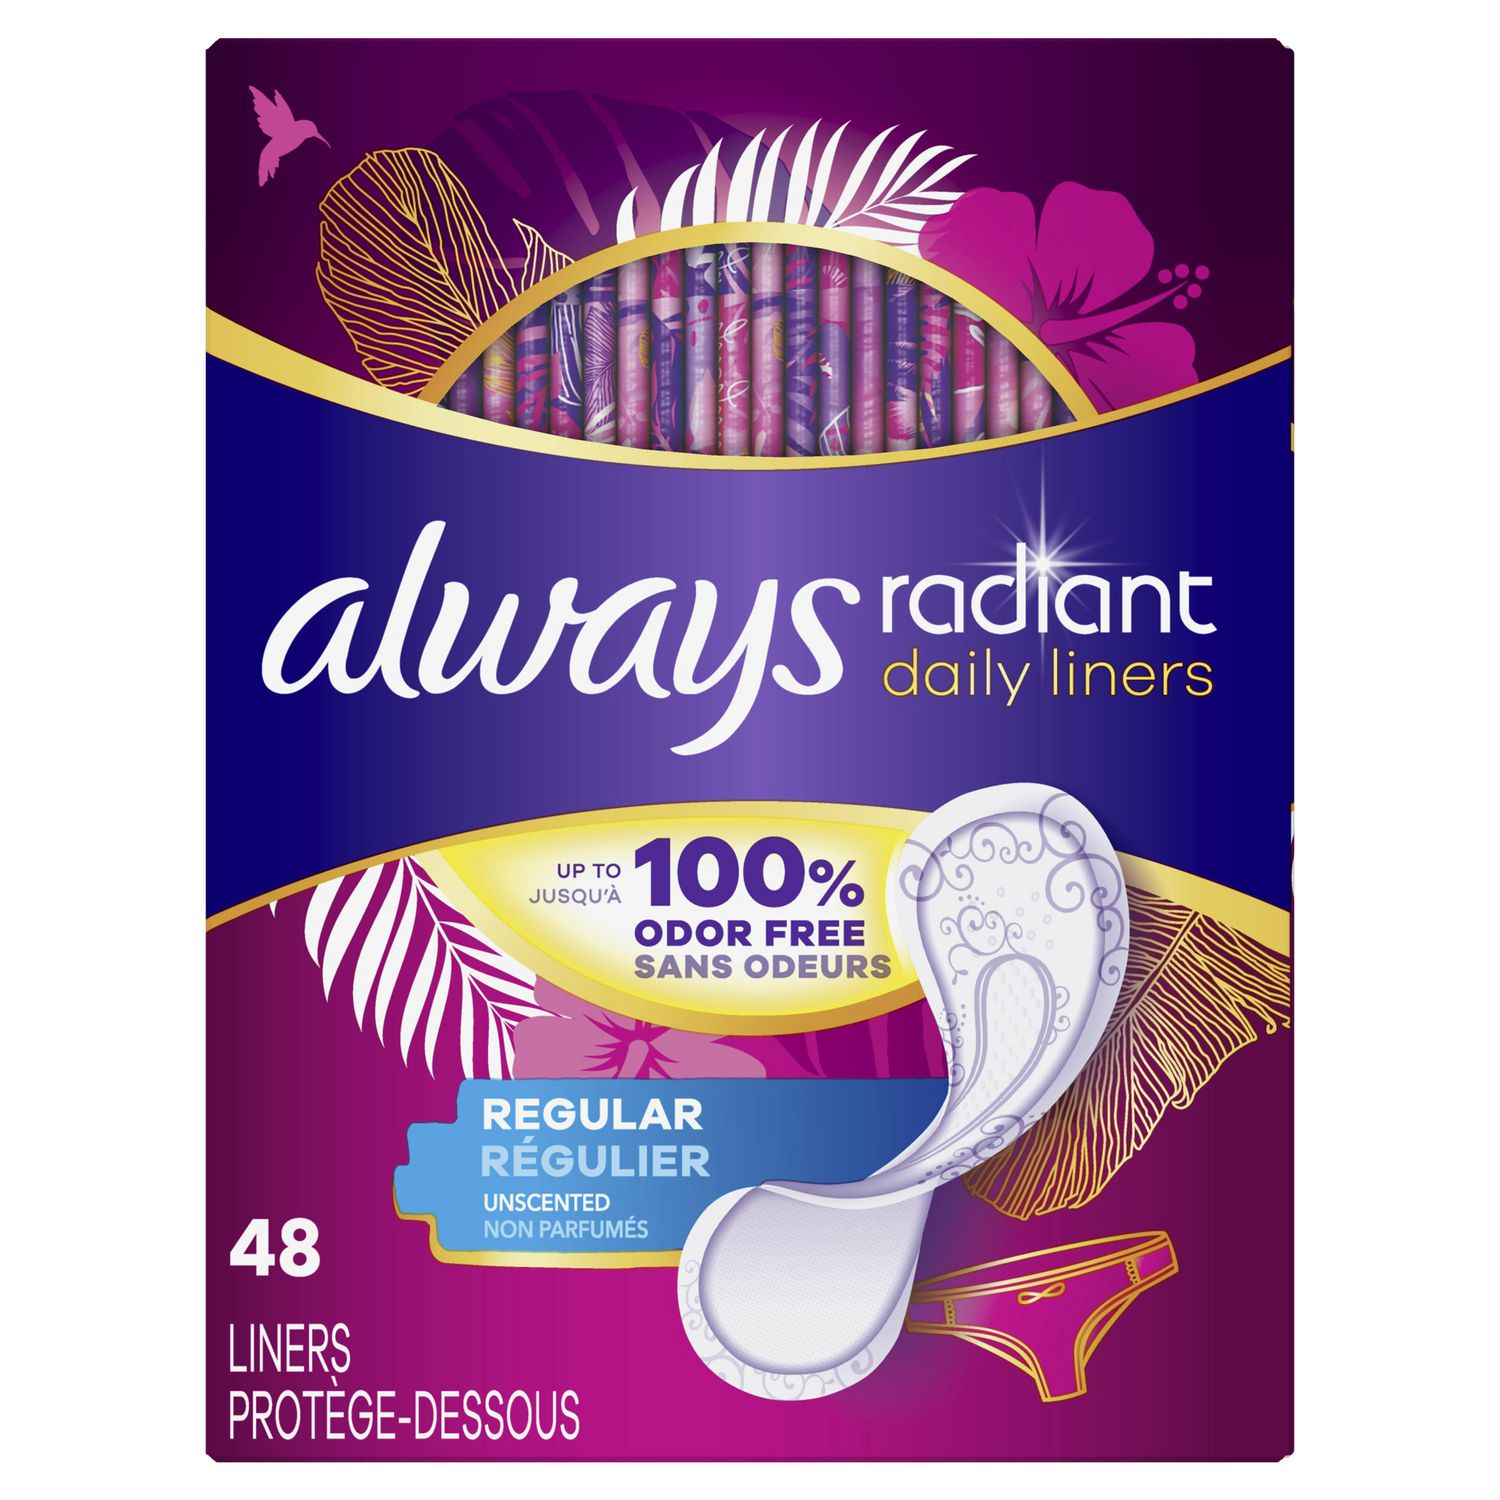 Carefree Panty Liners Regular Absorbency Wrapped Unscented, 54